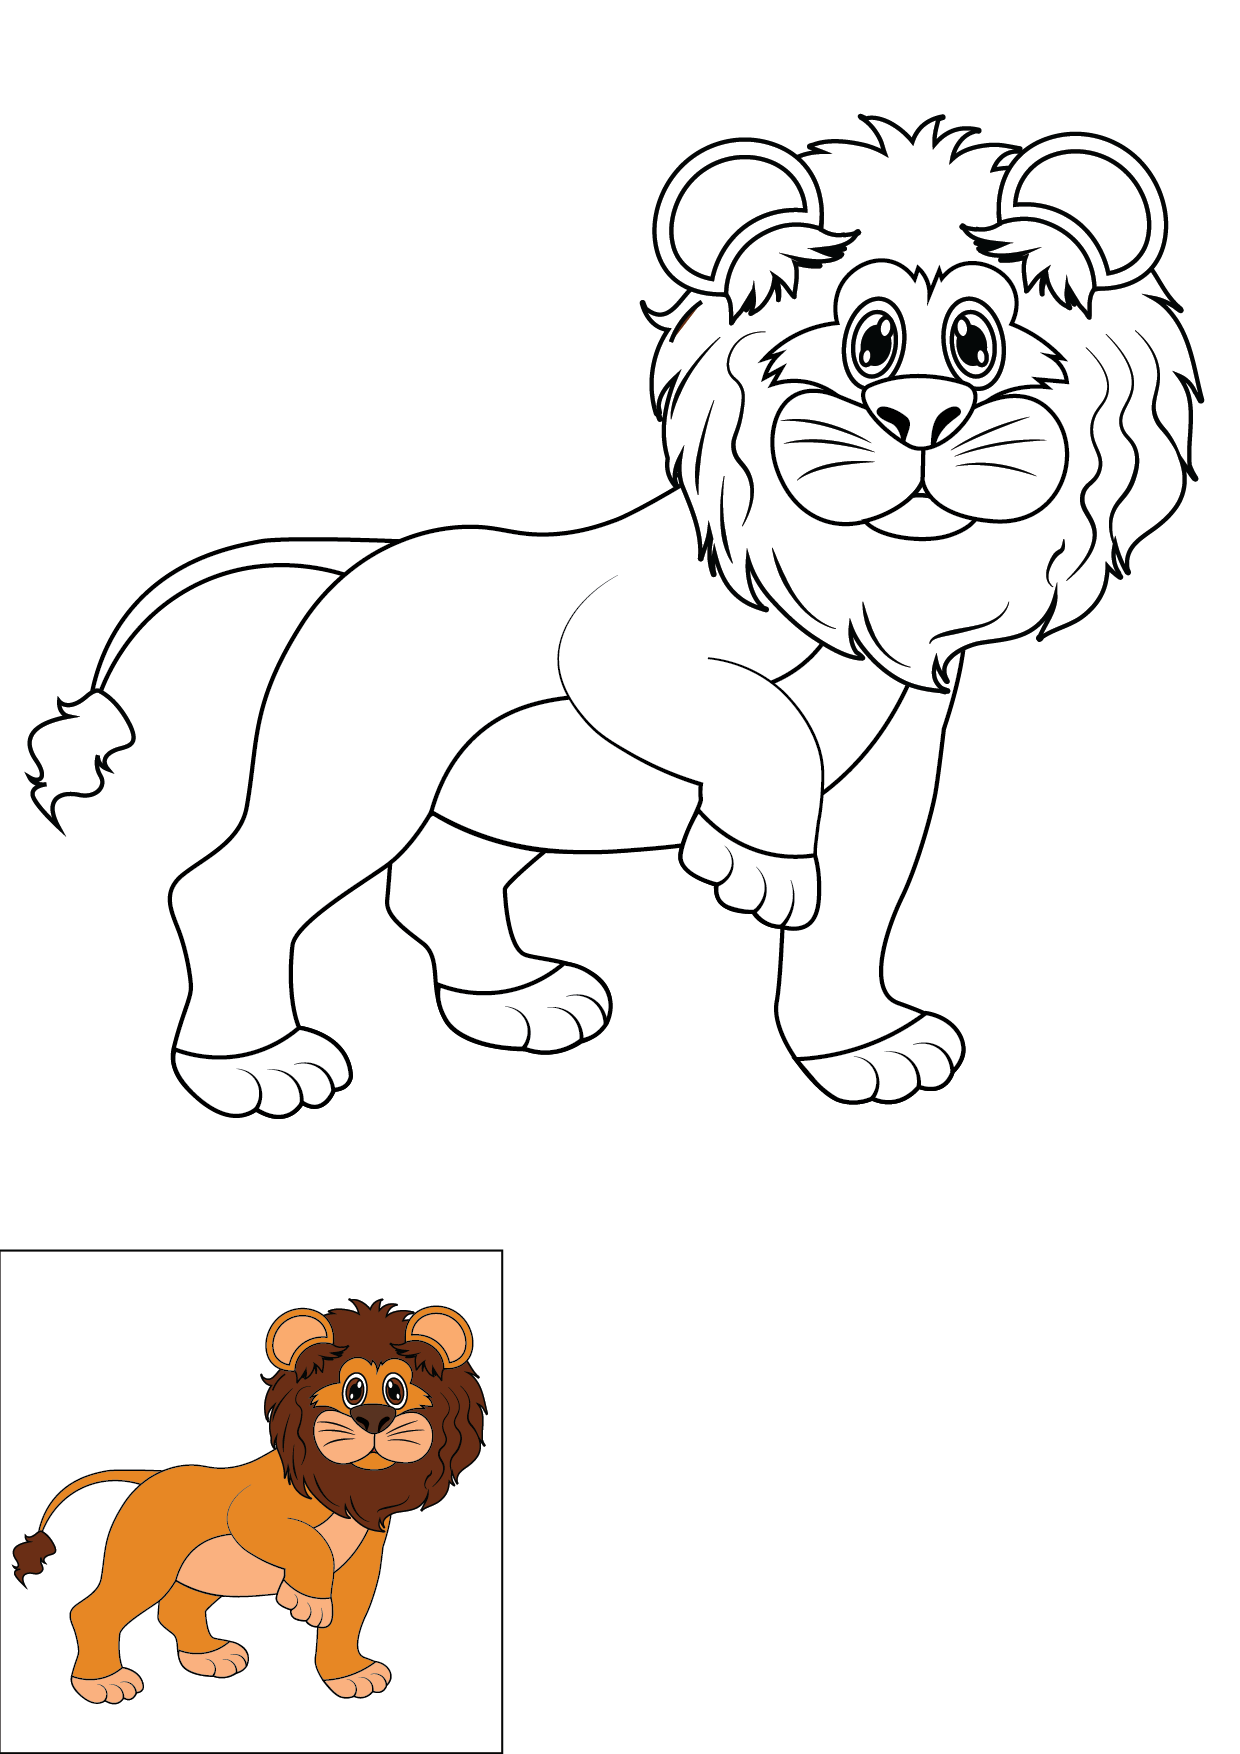 How to Draw A Lion Step by Step Printable Color